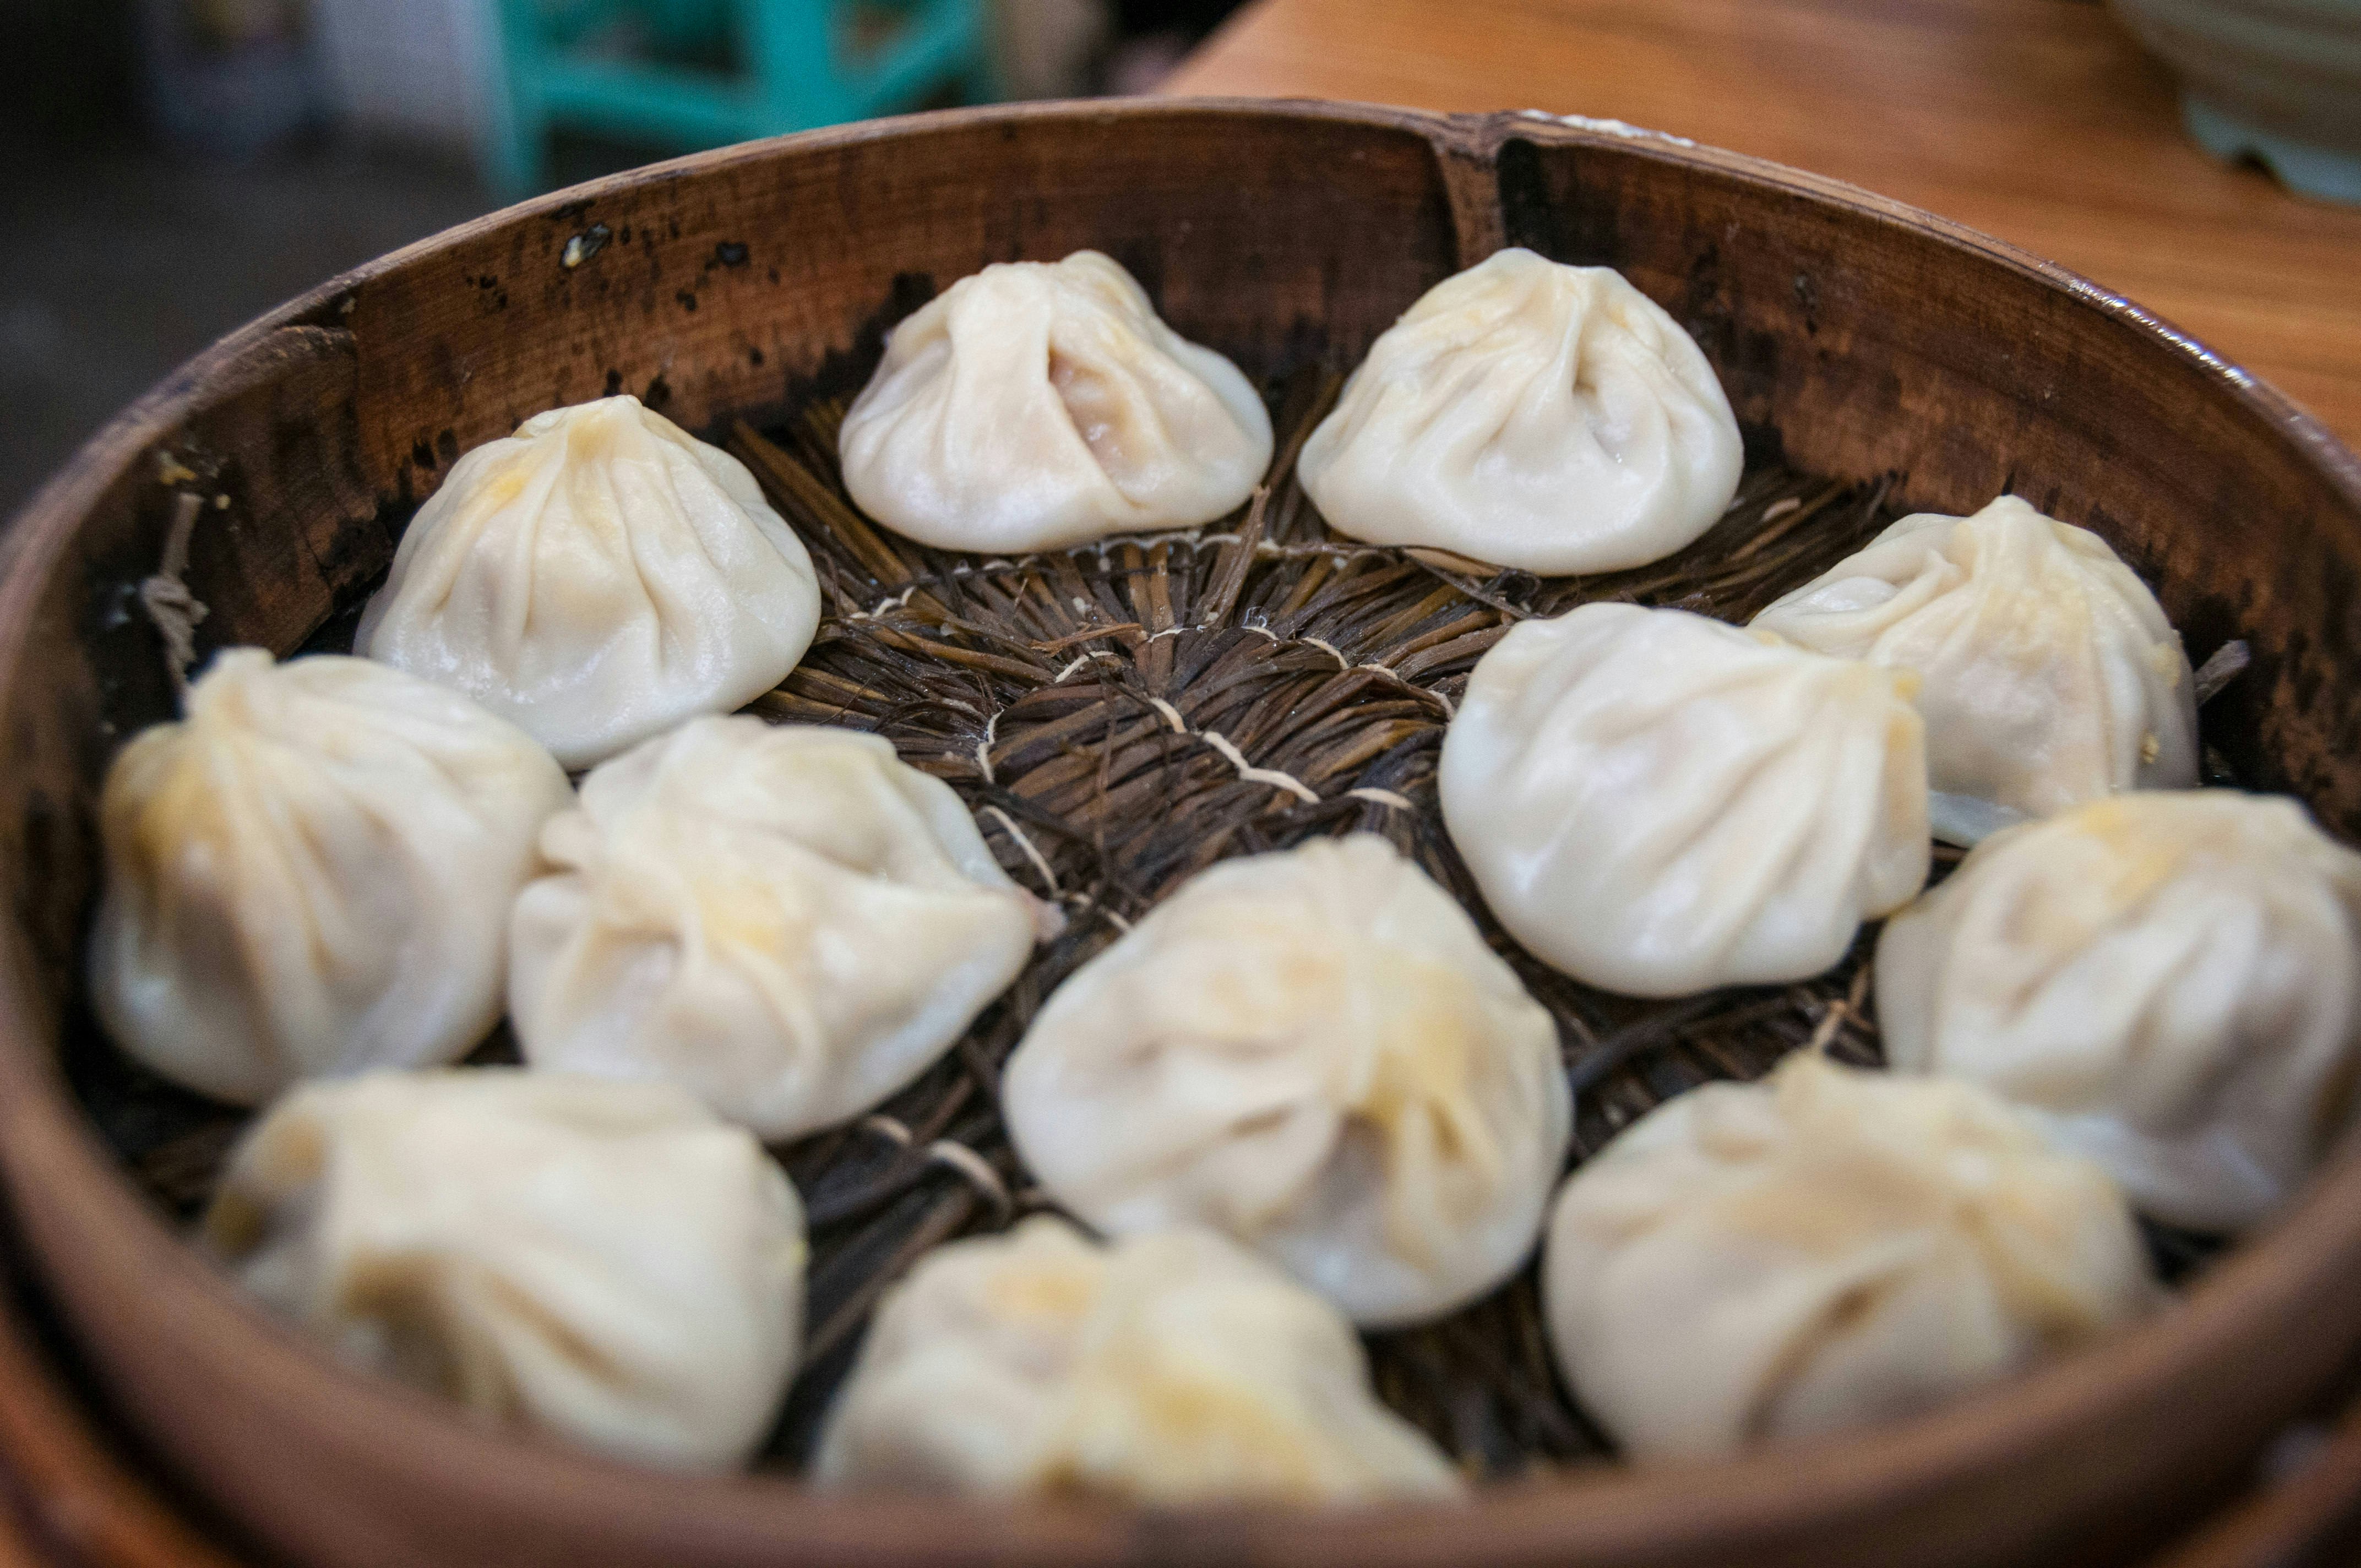 A number of white xiaolongbao (dumplings) cooling in a brown wicker basket on a tabletop.